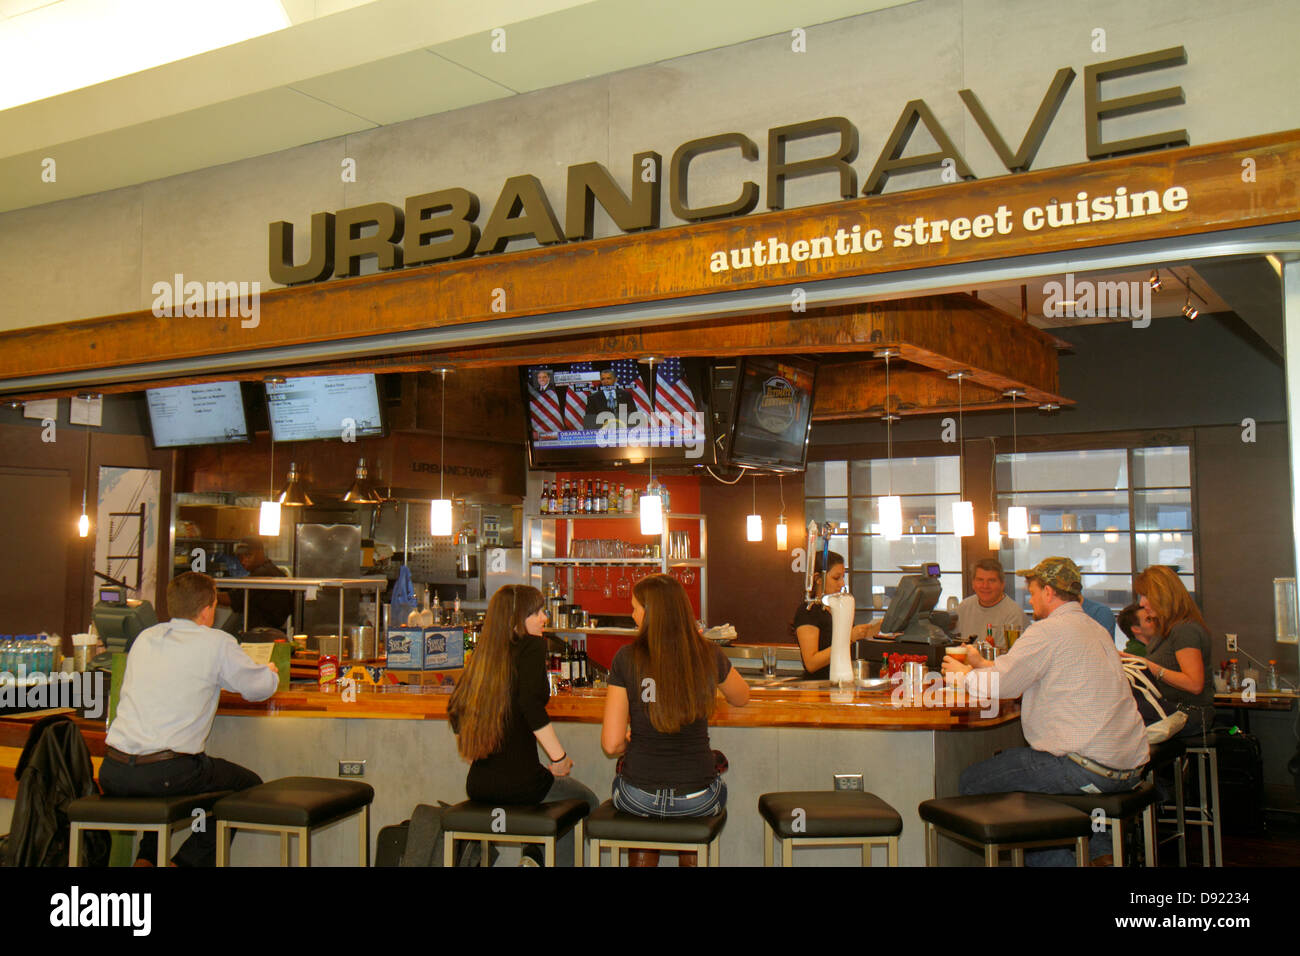 Texas,South,Southwest,Houston,George Bush Intercontinental Airport,IAH,gate,UrbanCrave,Urban Crave,restaurant restaurants food dining eating out cafe Stock Photo